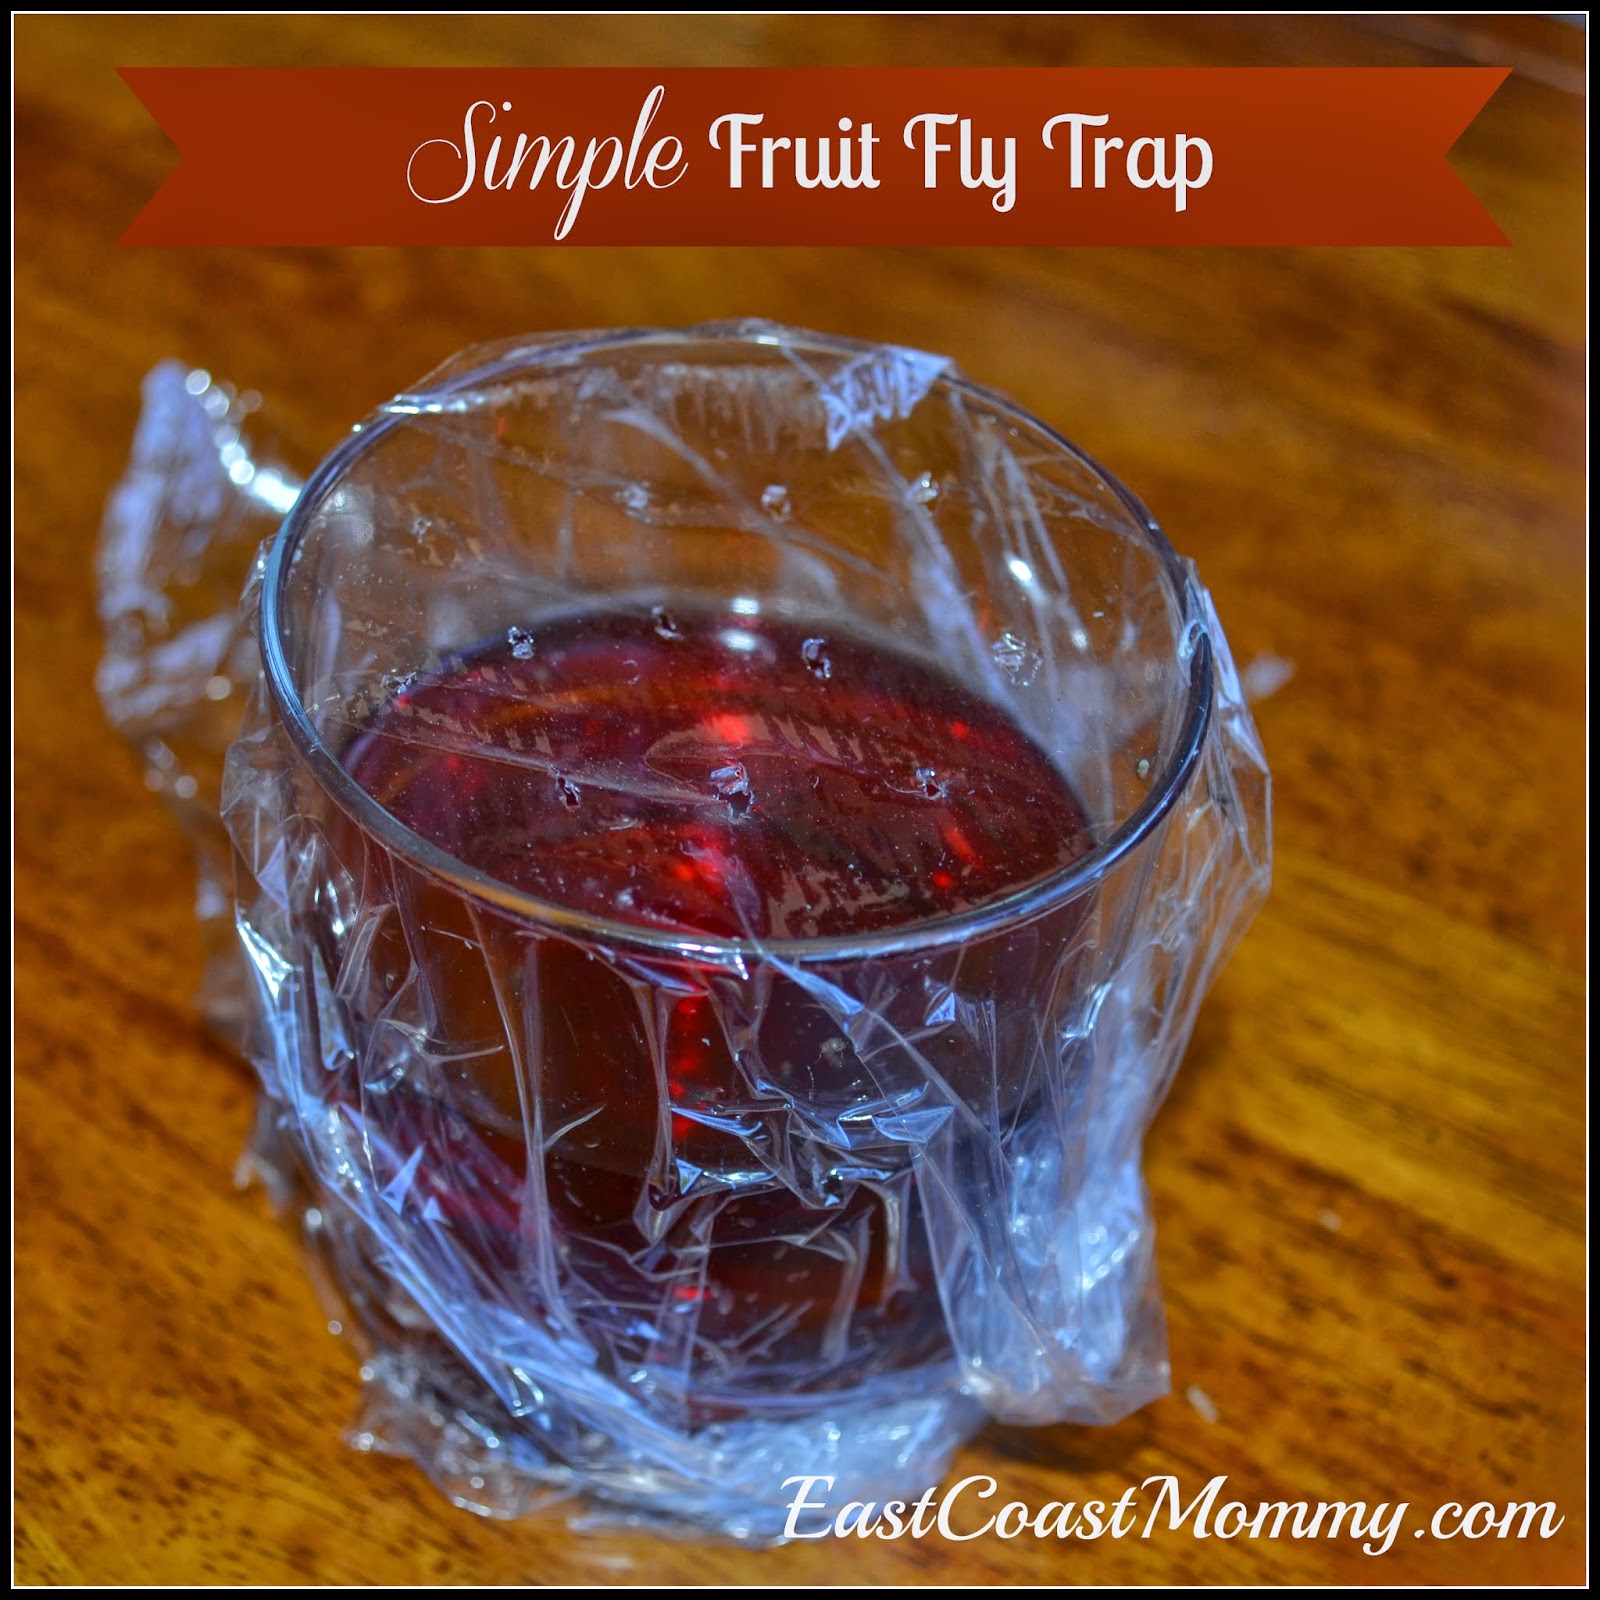 How To Get Rid Of Fruit Flies In House